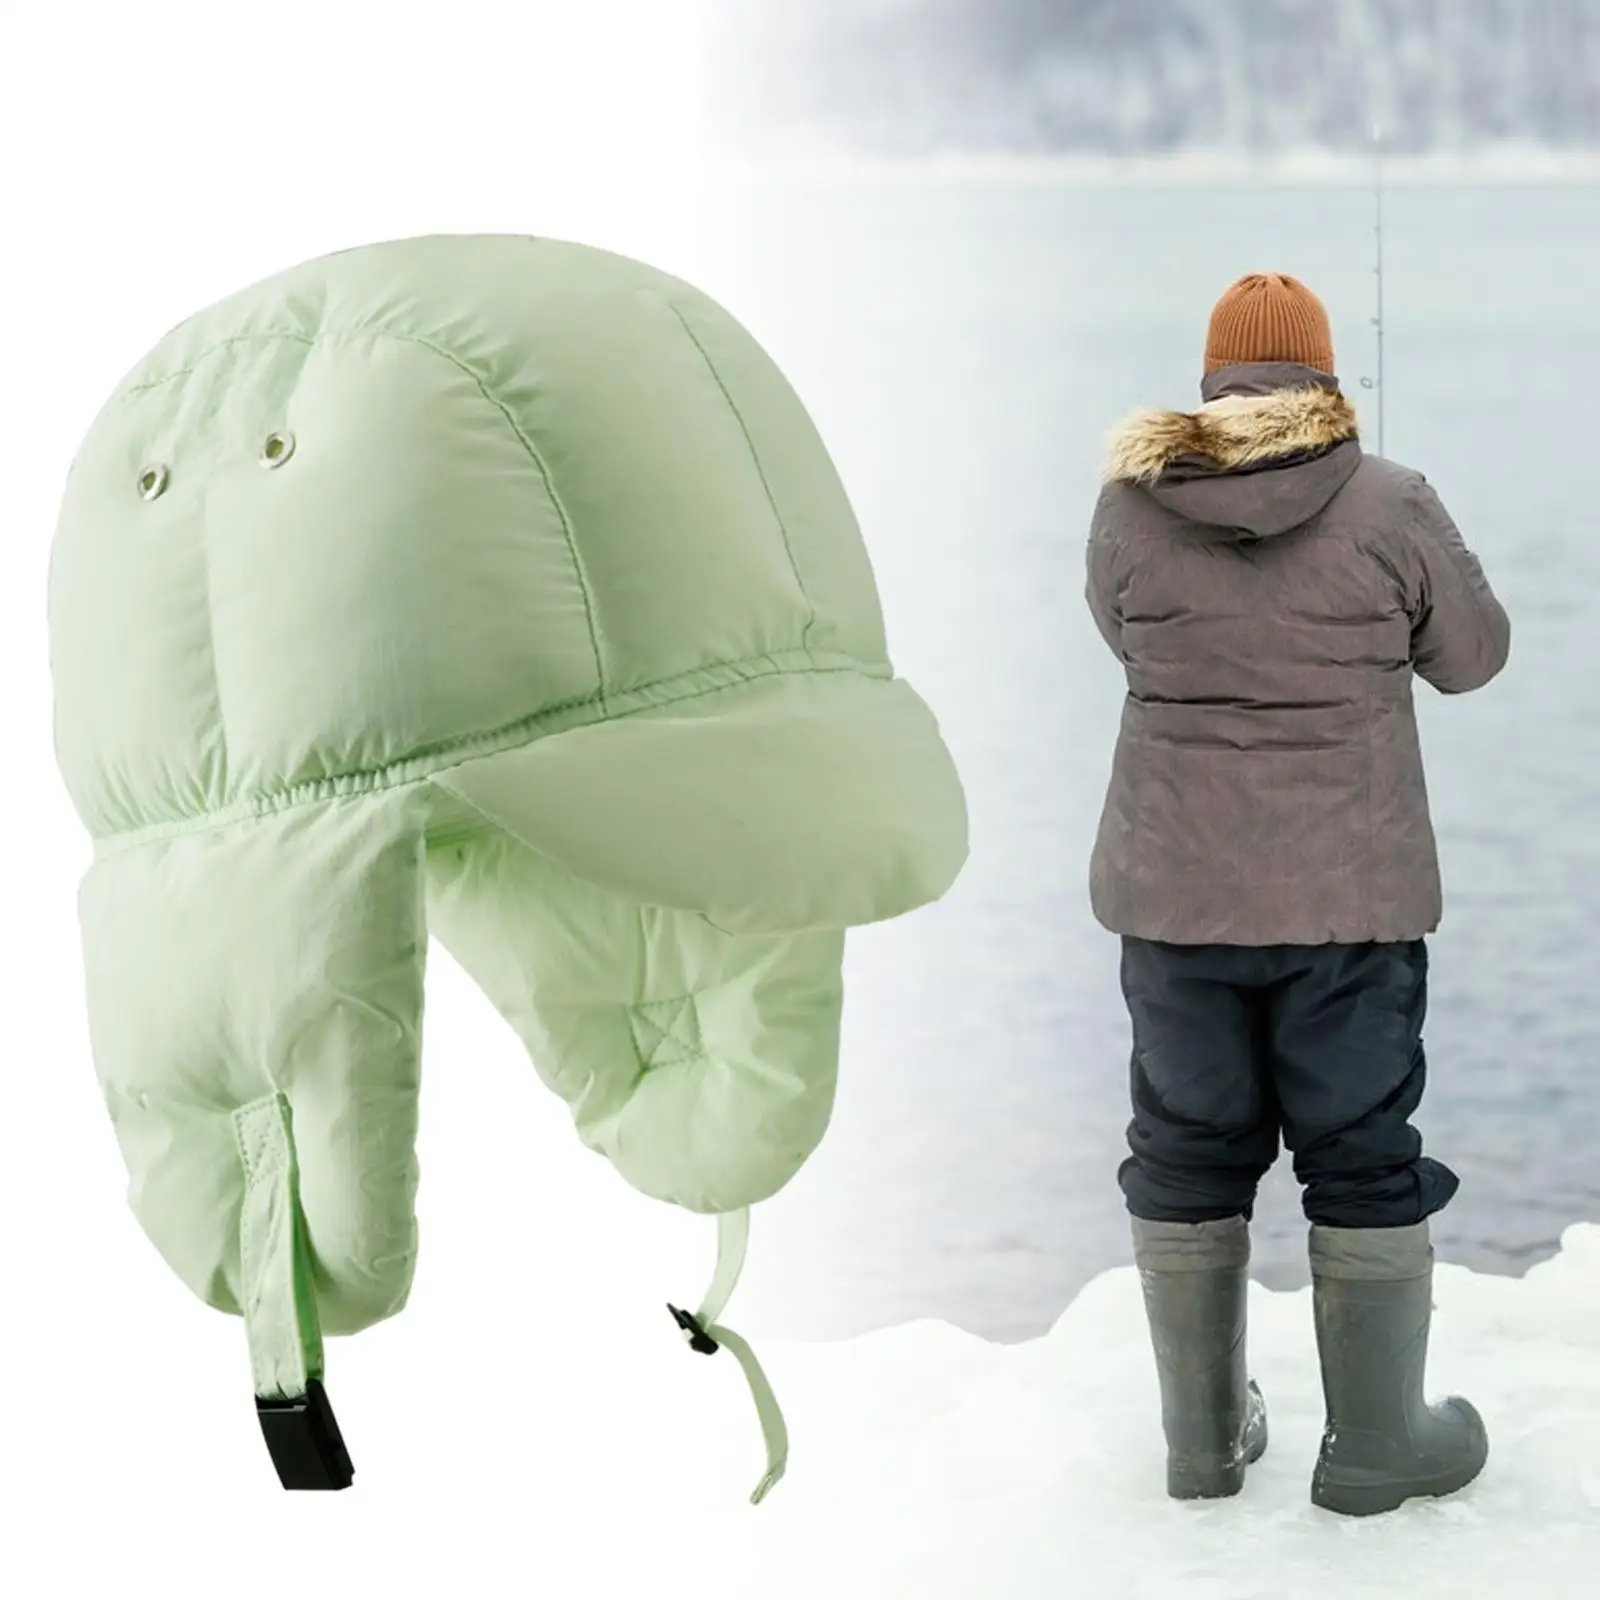 Hat with Earflaps for Women with Ear Flaps Warm Hat with Peak Winter Hat for Biking Hiking Skiing Cold Weather Outdoor